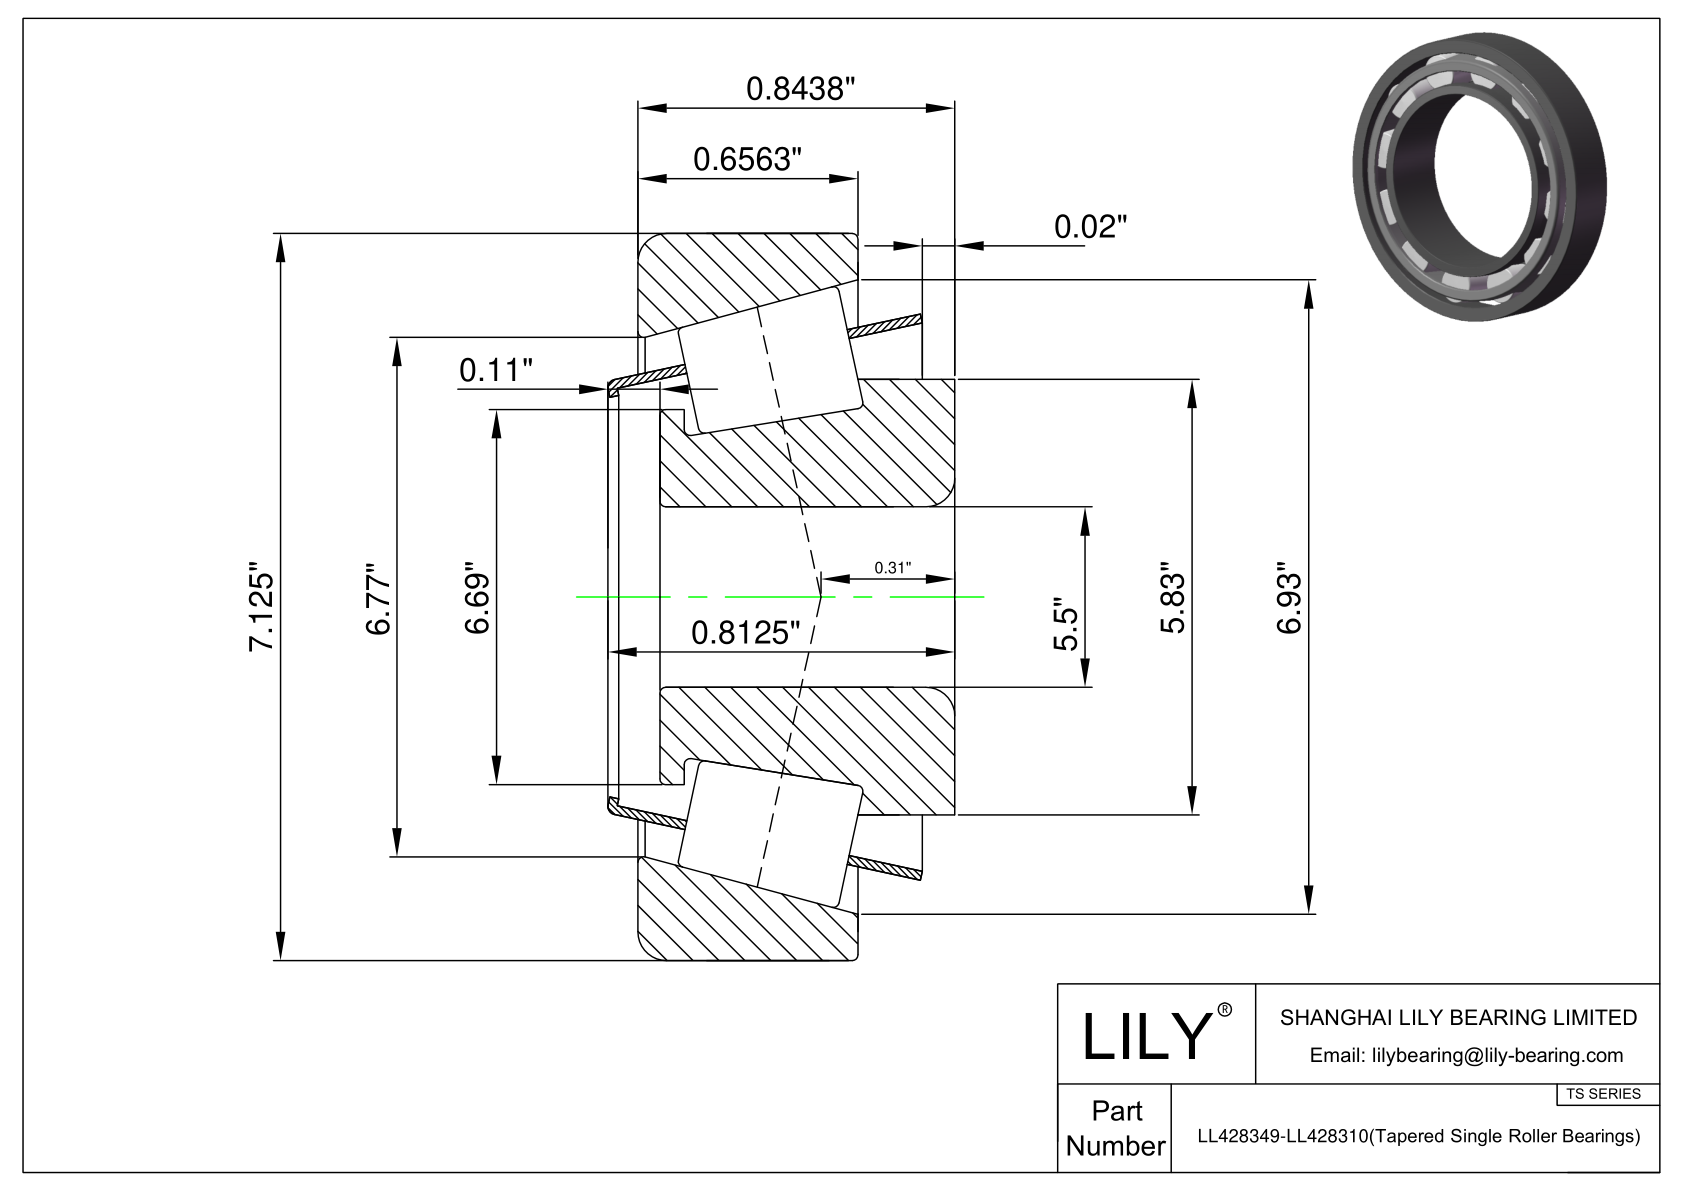 LL428349-LL428310 TS (Tapered Single Roller Bearings) (Imperial) cad drawing